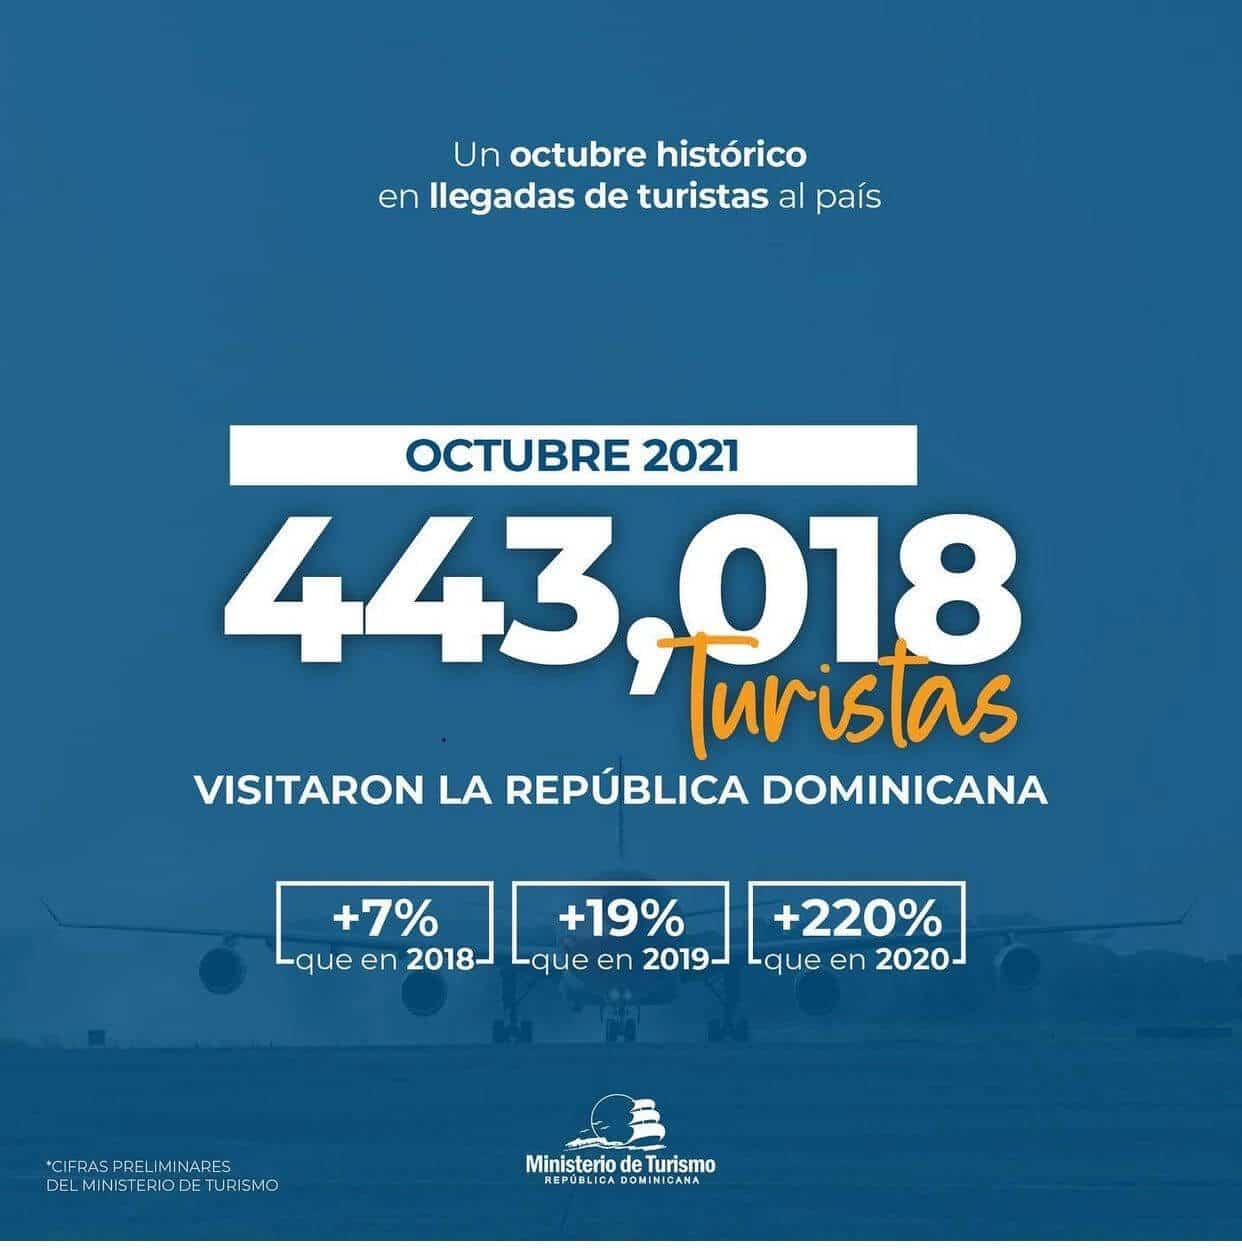 A historic October in tourist arrivals to the Dominican Republic